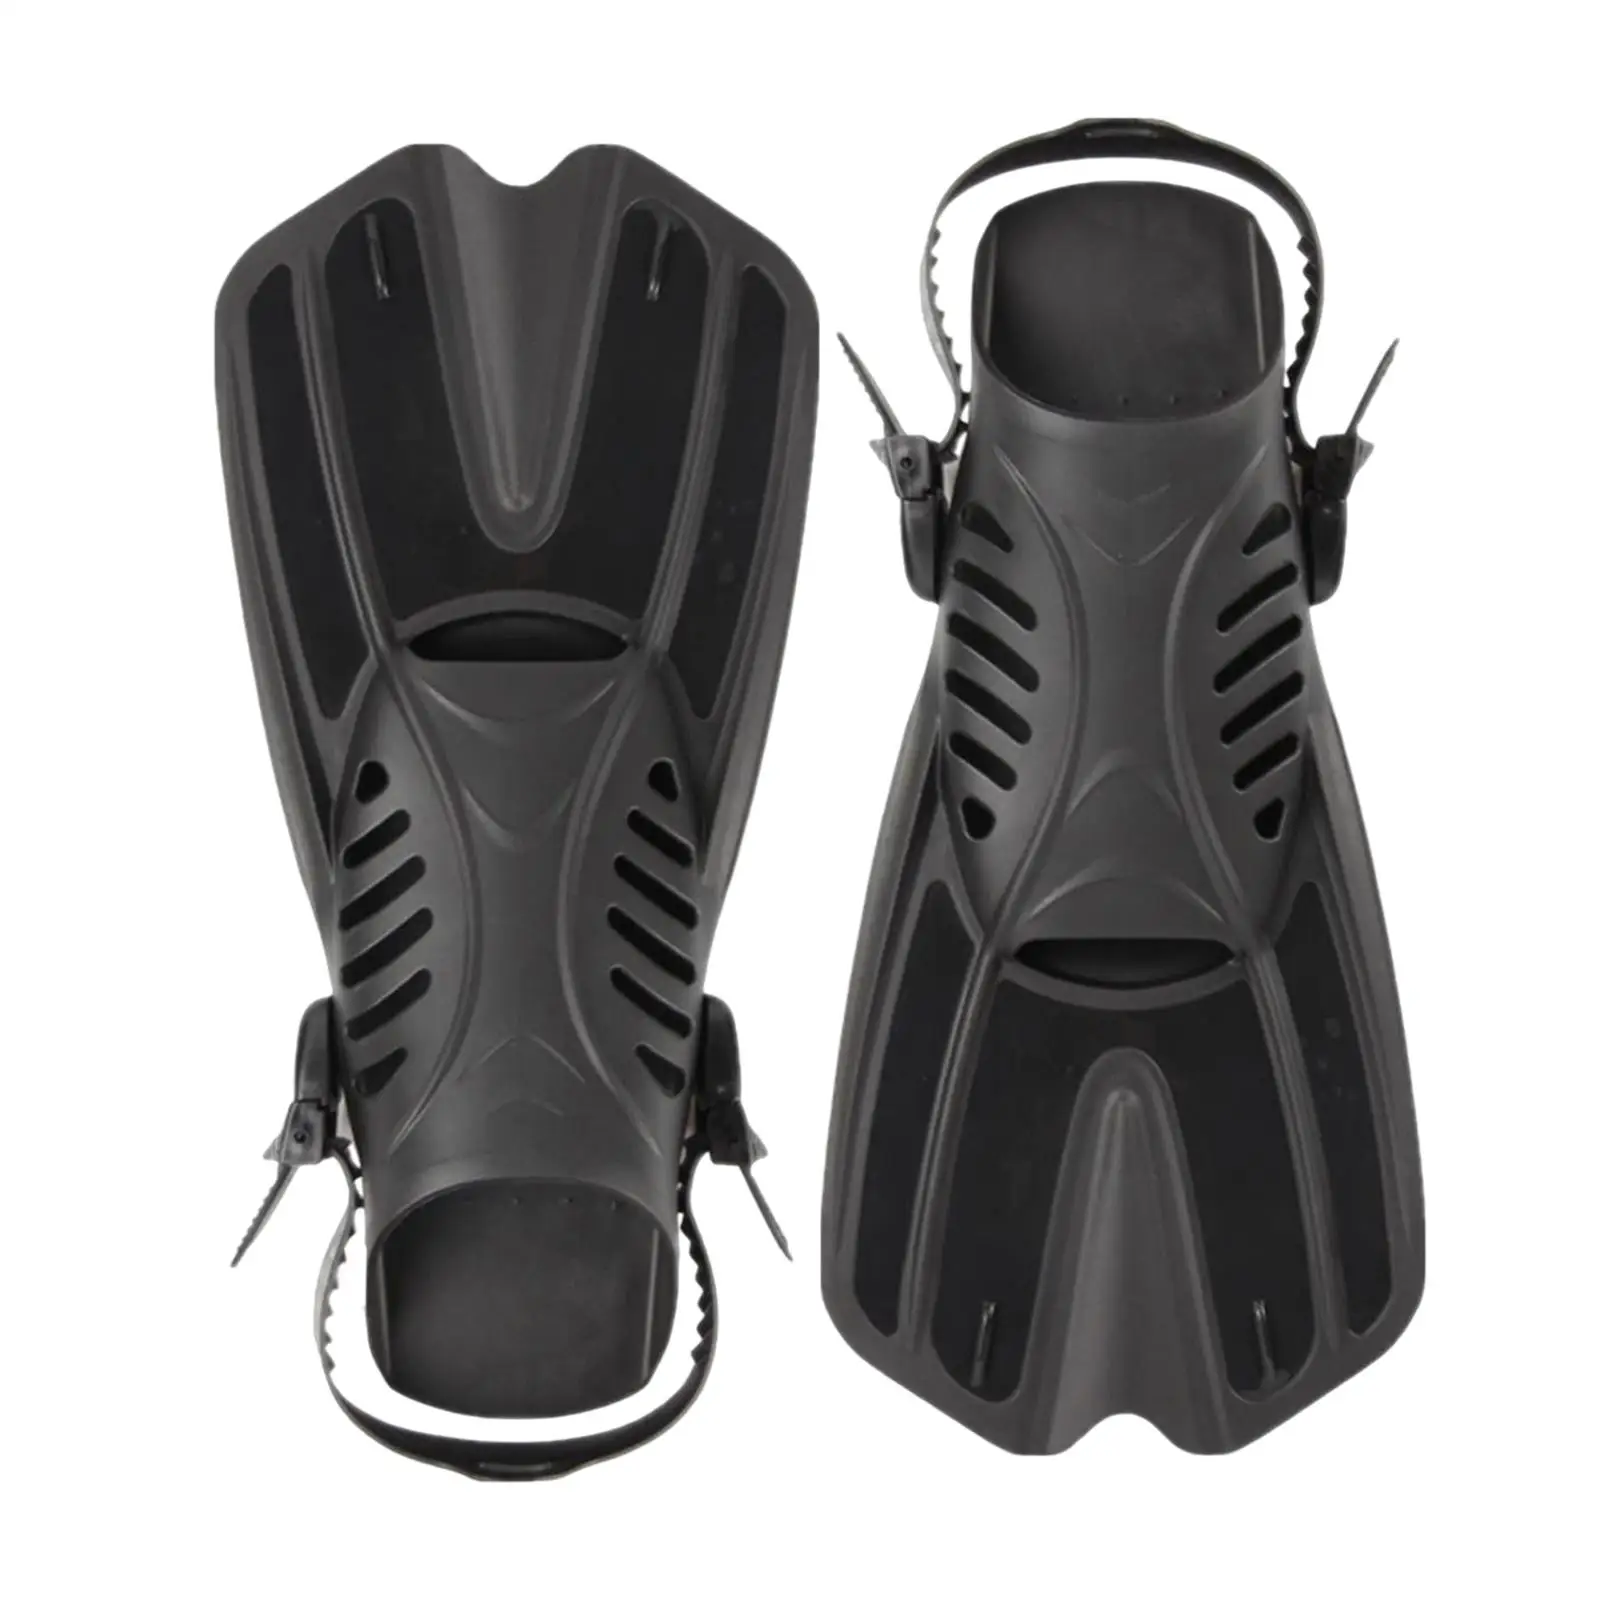 2x Flexible Diving Flippers Equipment Foot Flippers for Diving Scuba Dive Adults